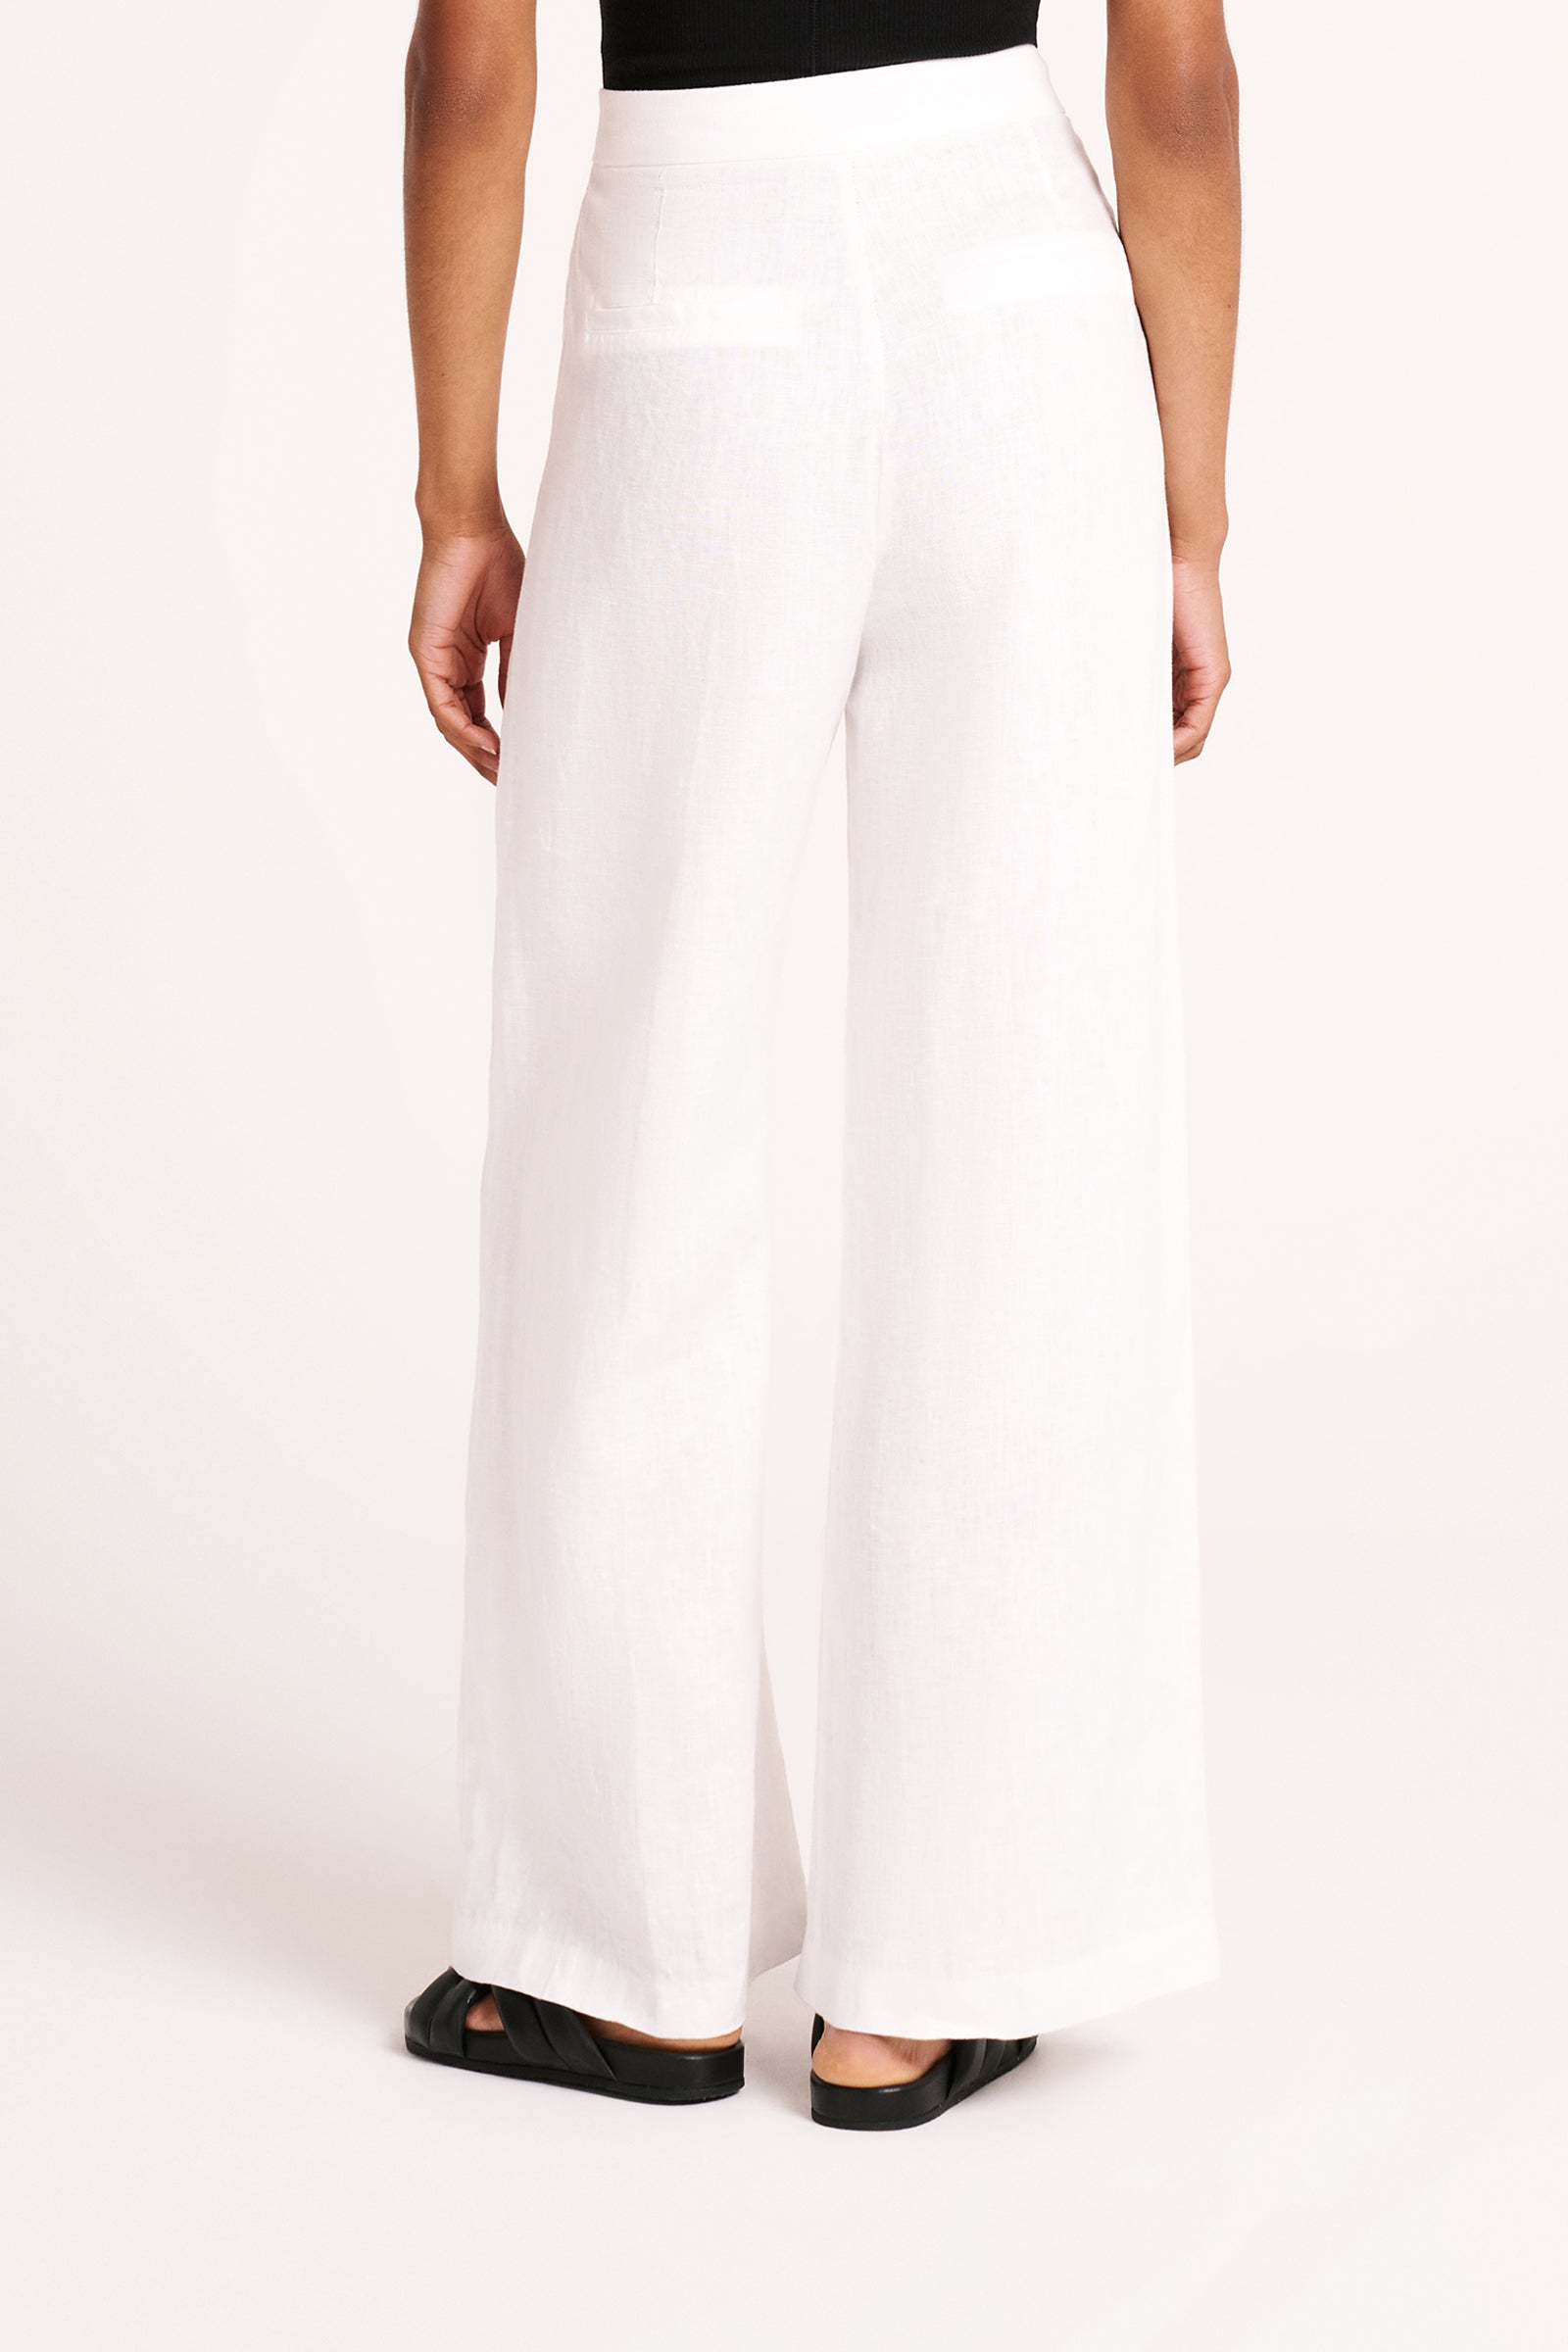 Shop Thilda Linen Pant in White | Nude Lucy